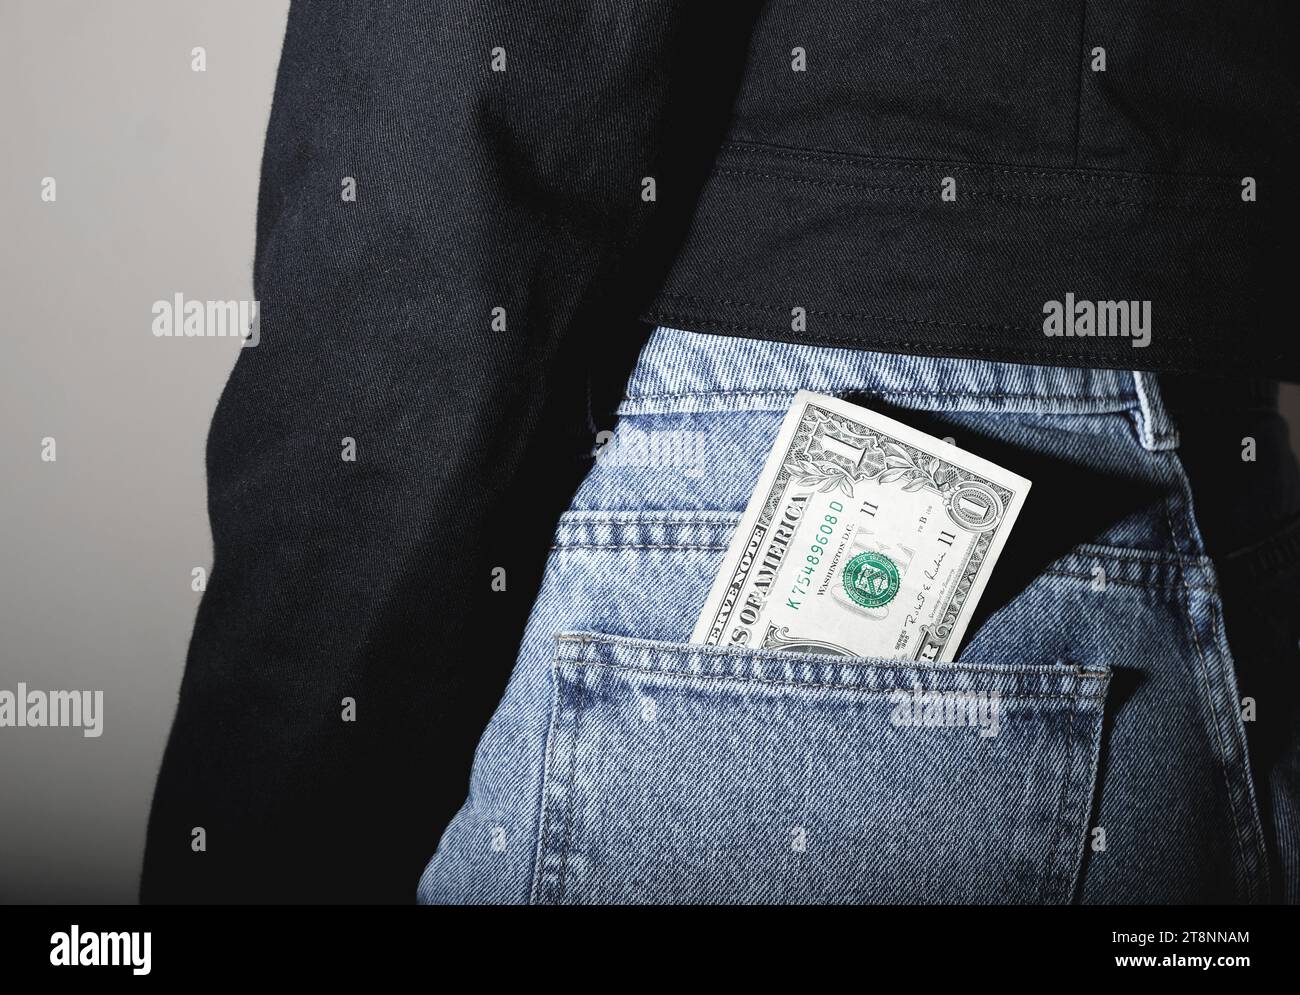 One dollar Bill Sticking Out Of A Pocket. The banknote is sharply contrasted Stock Photo